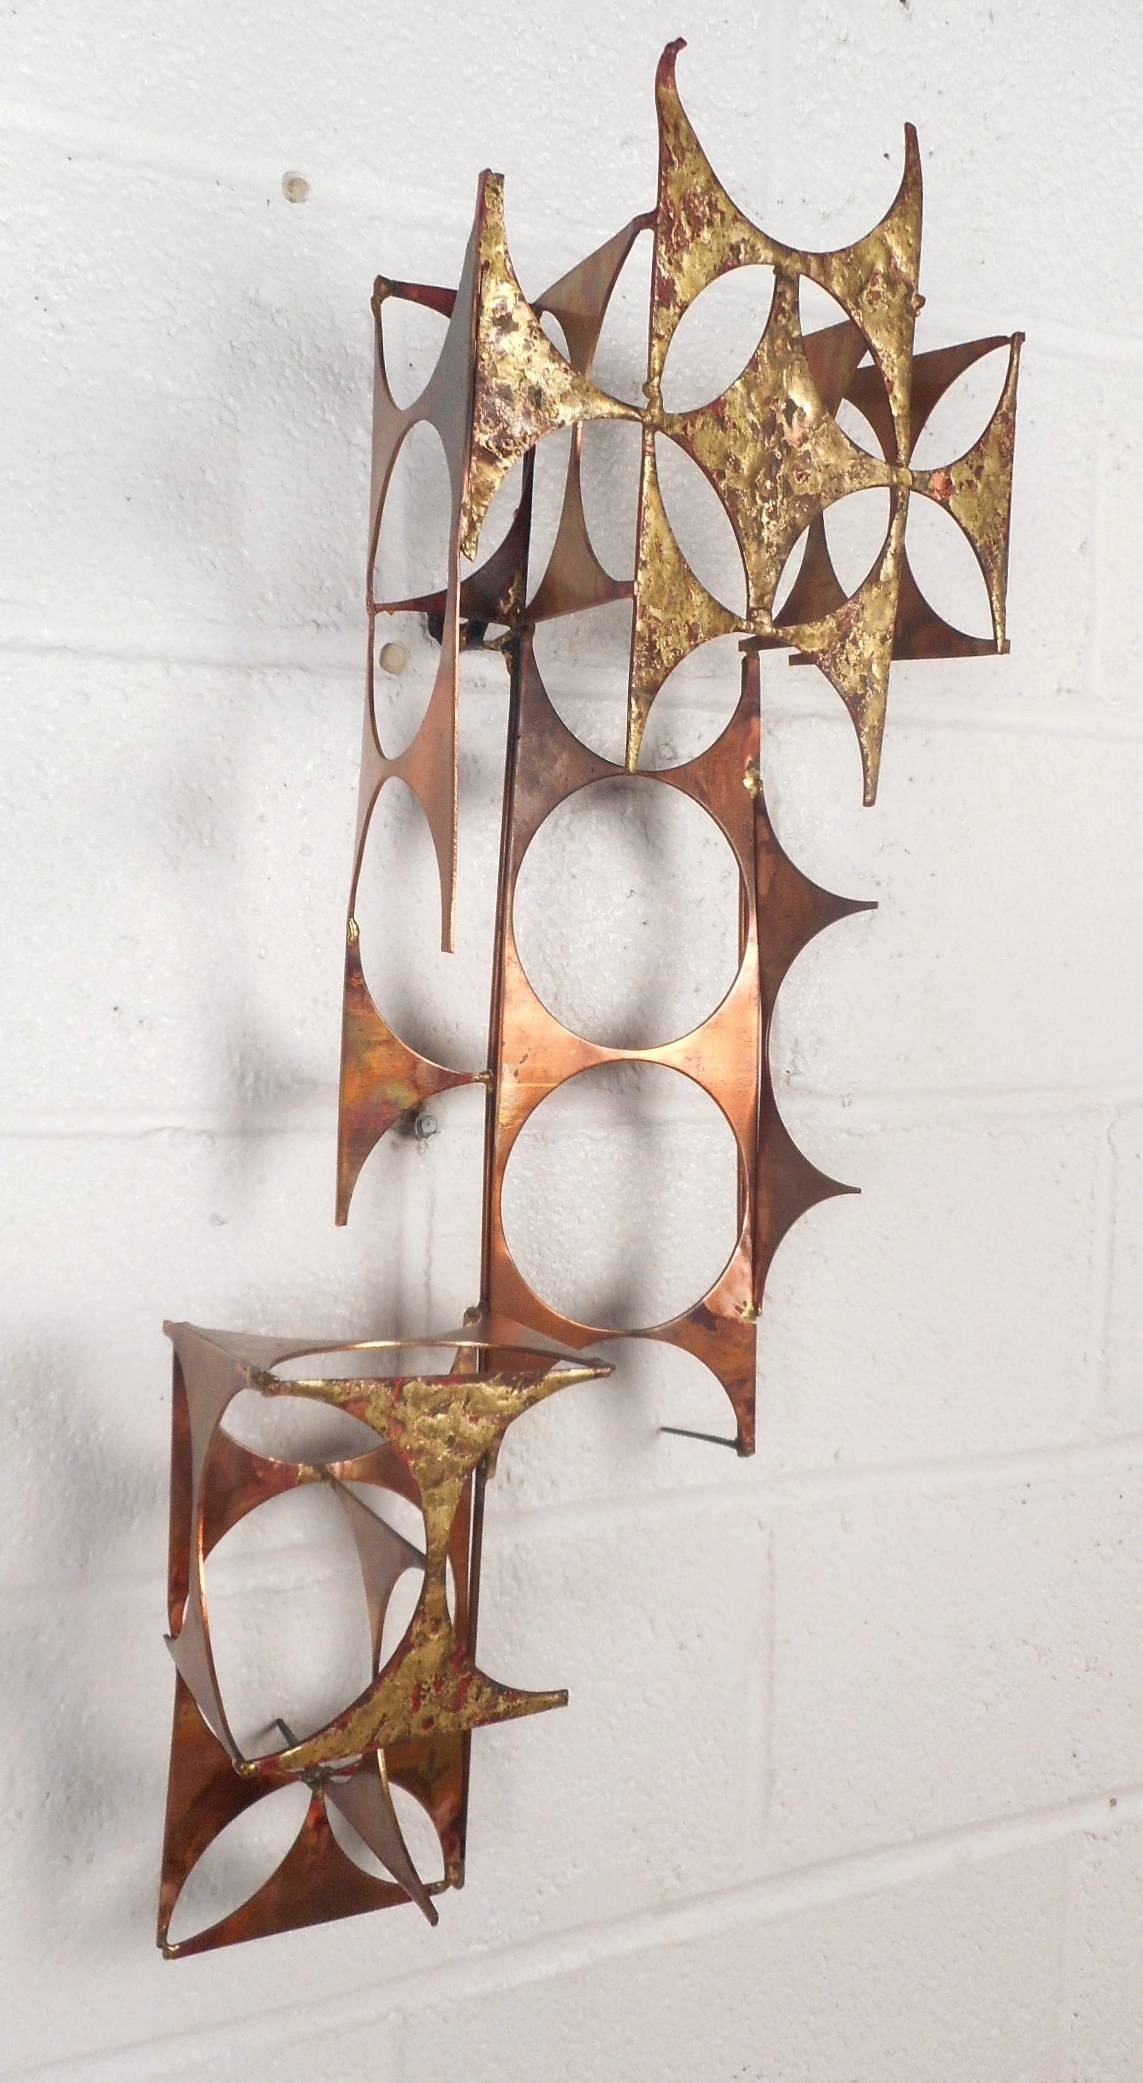 This beautiful vintage modern wall sculpture is made of mixed metals and features unique three dimensional designs. Versatile piece of art can be hung vertical or horizontal. Elegant mid-century decoration shows incredible detail and elaborate